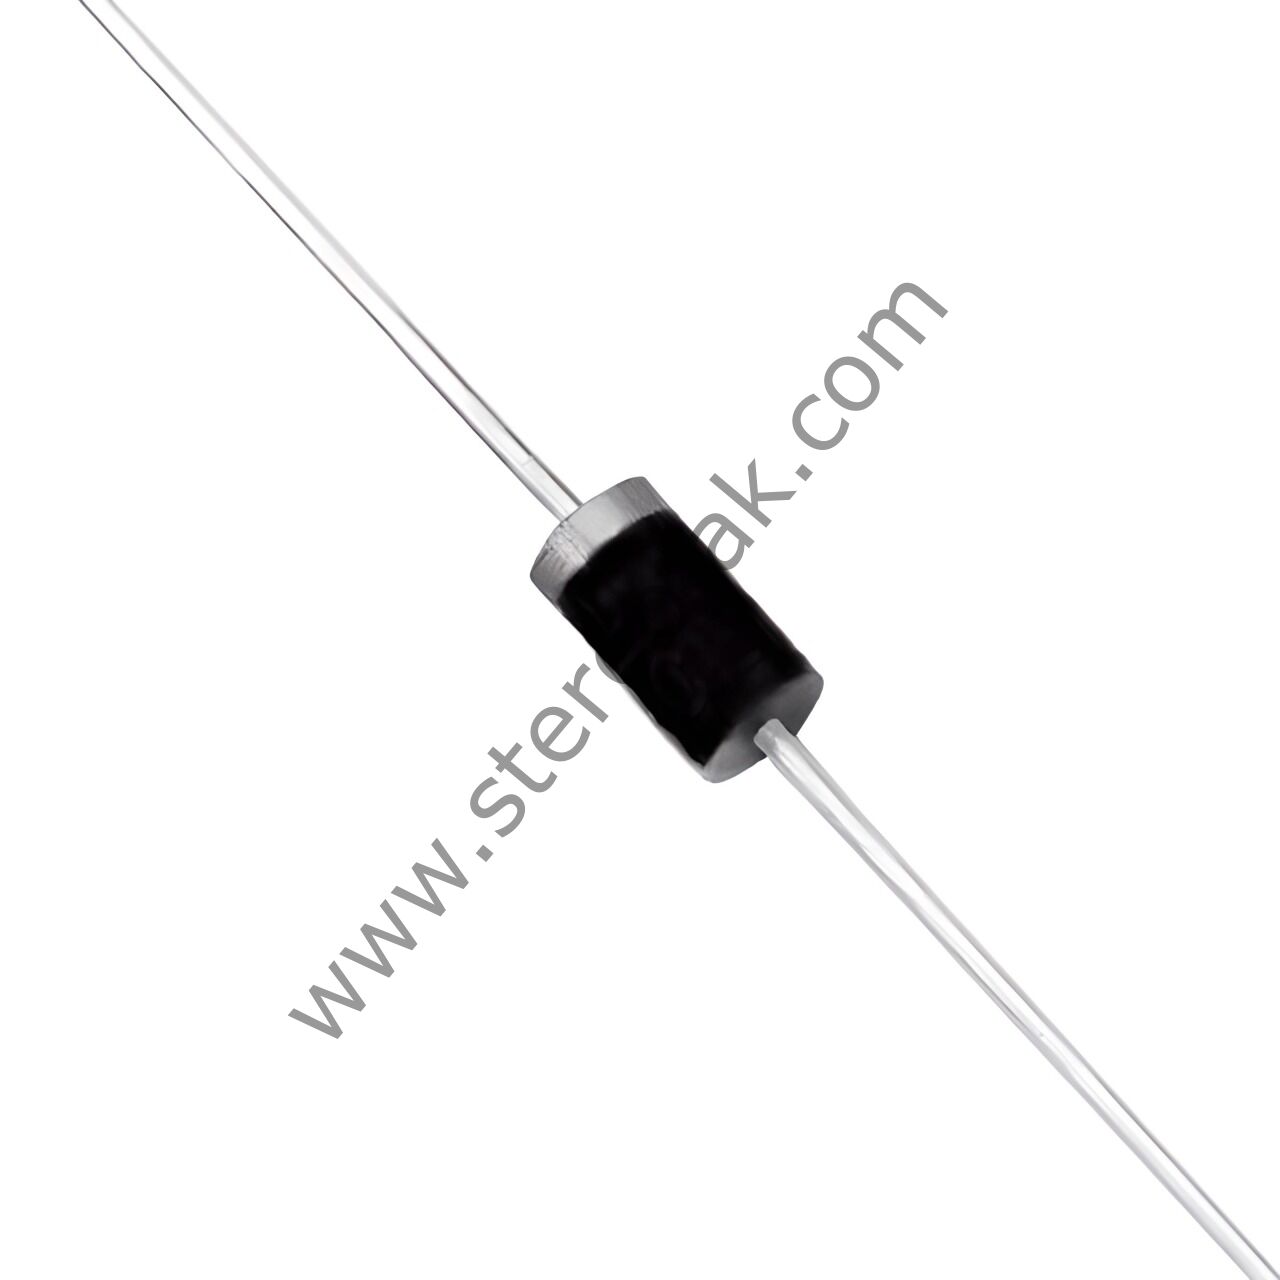 UF3010 DO-201 3A 1000V ULTRAFAST SWITCHING RECTIFIER DIODE